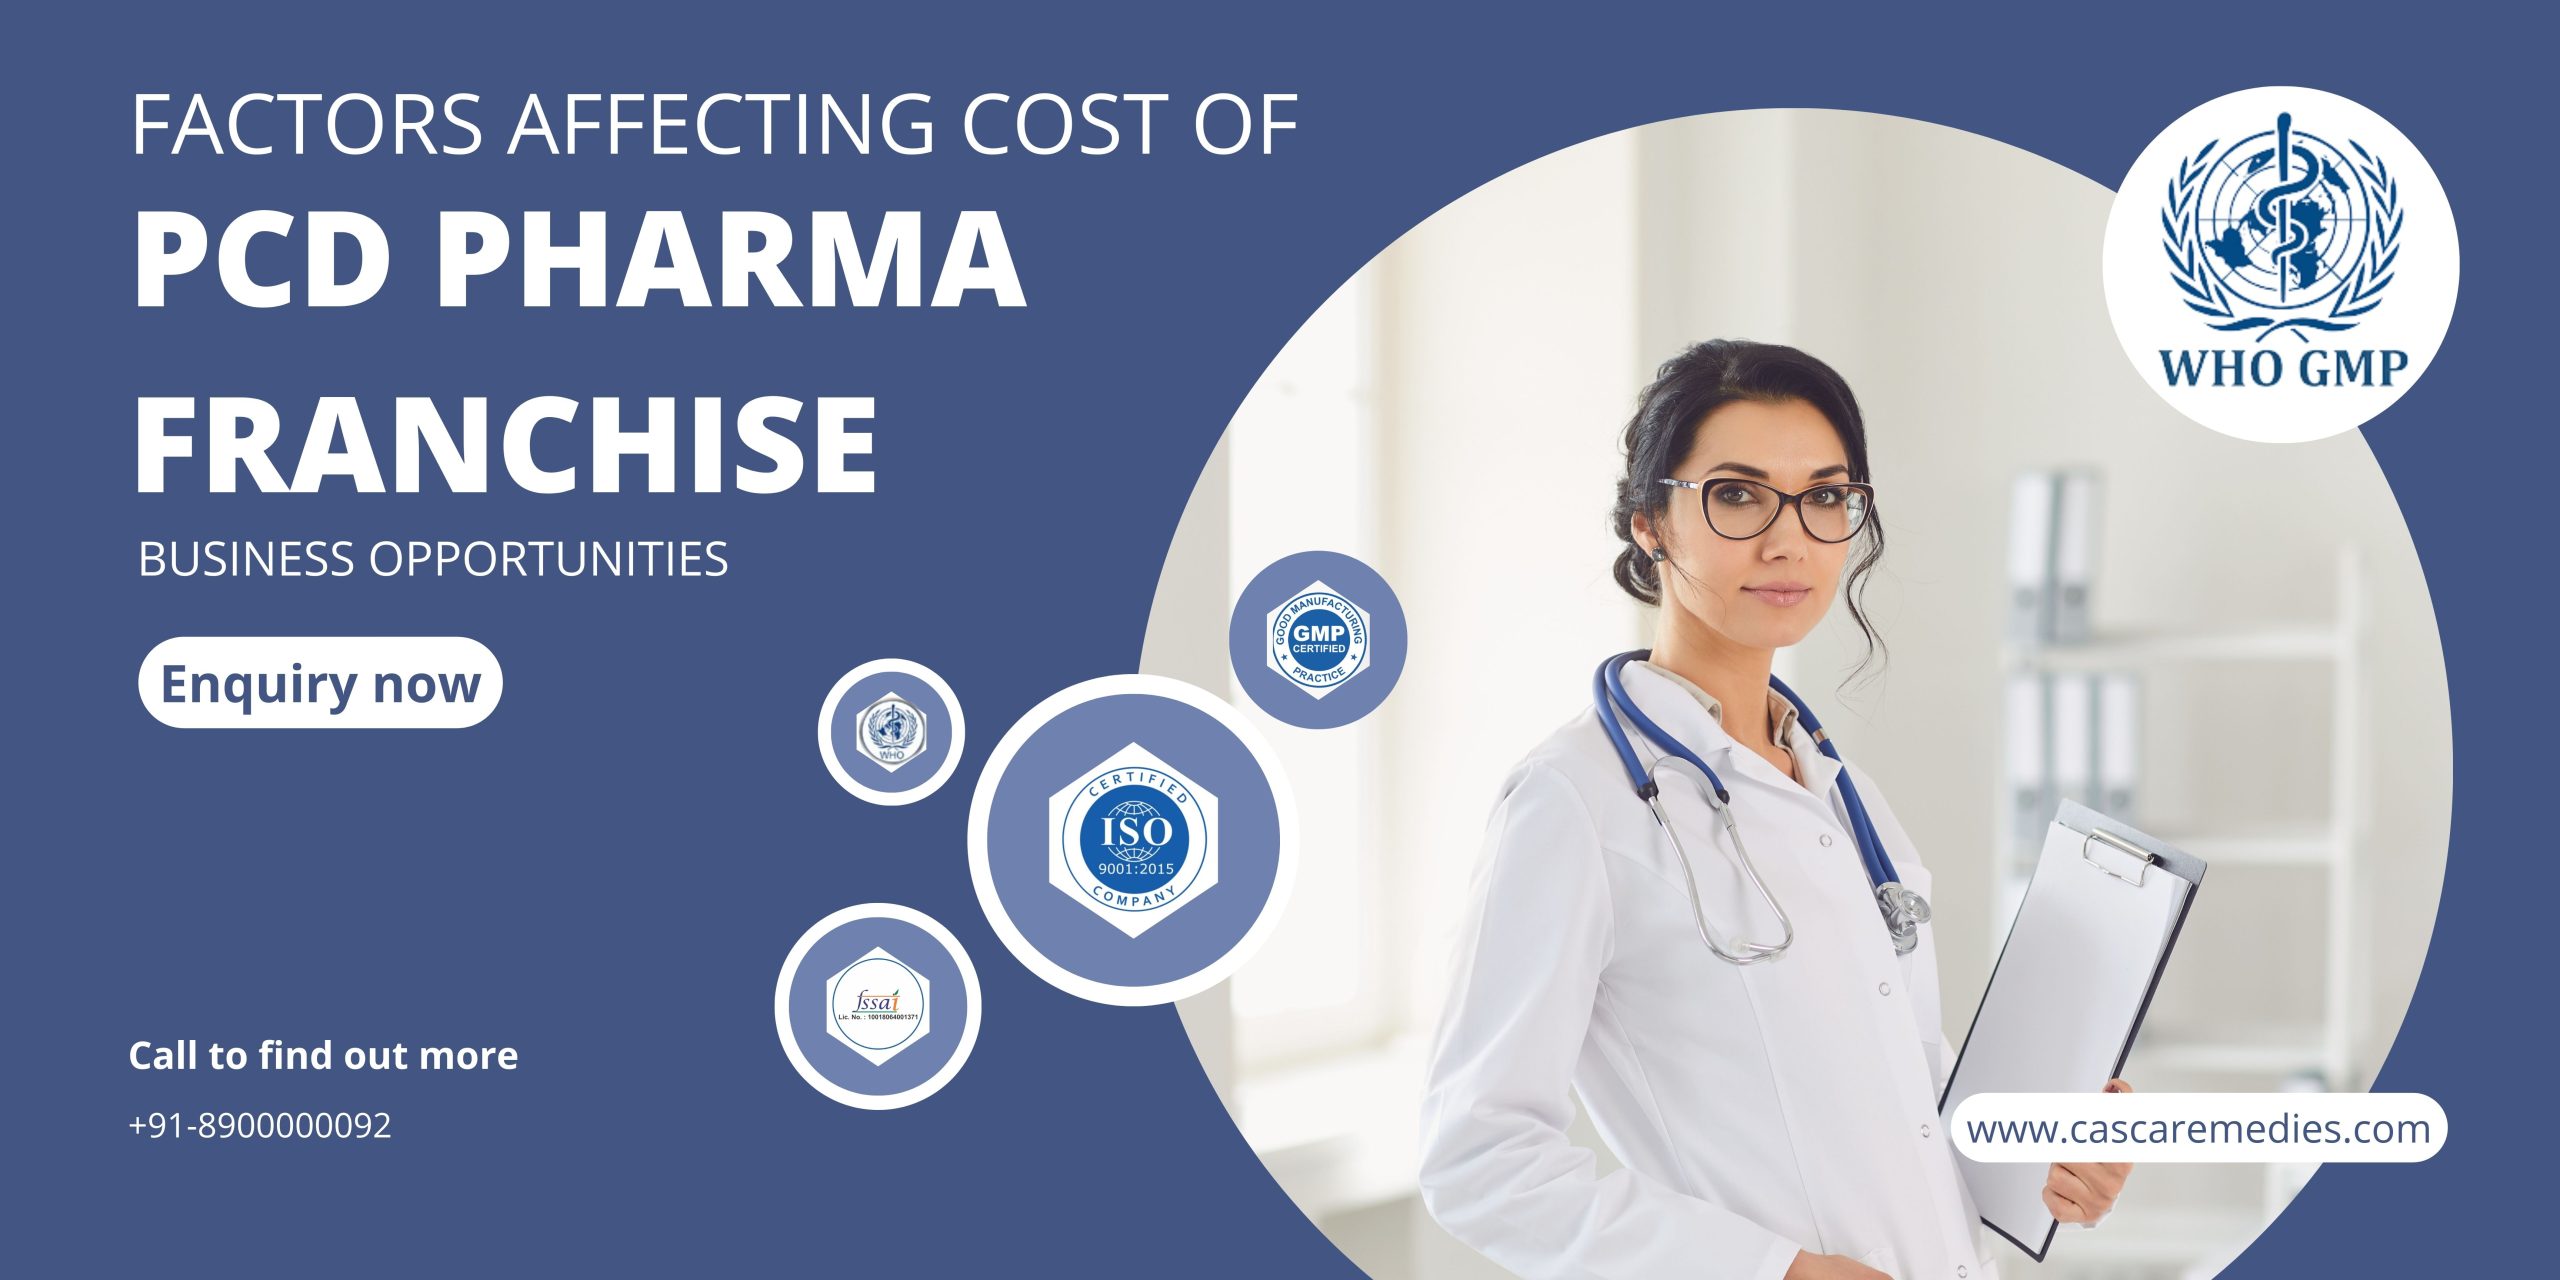 Factors Affecting Cost of PCD Pharma Franchise Business Opportunities